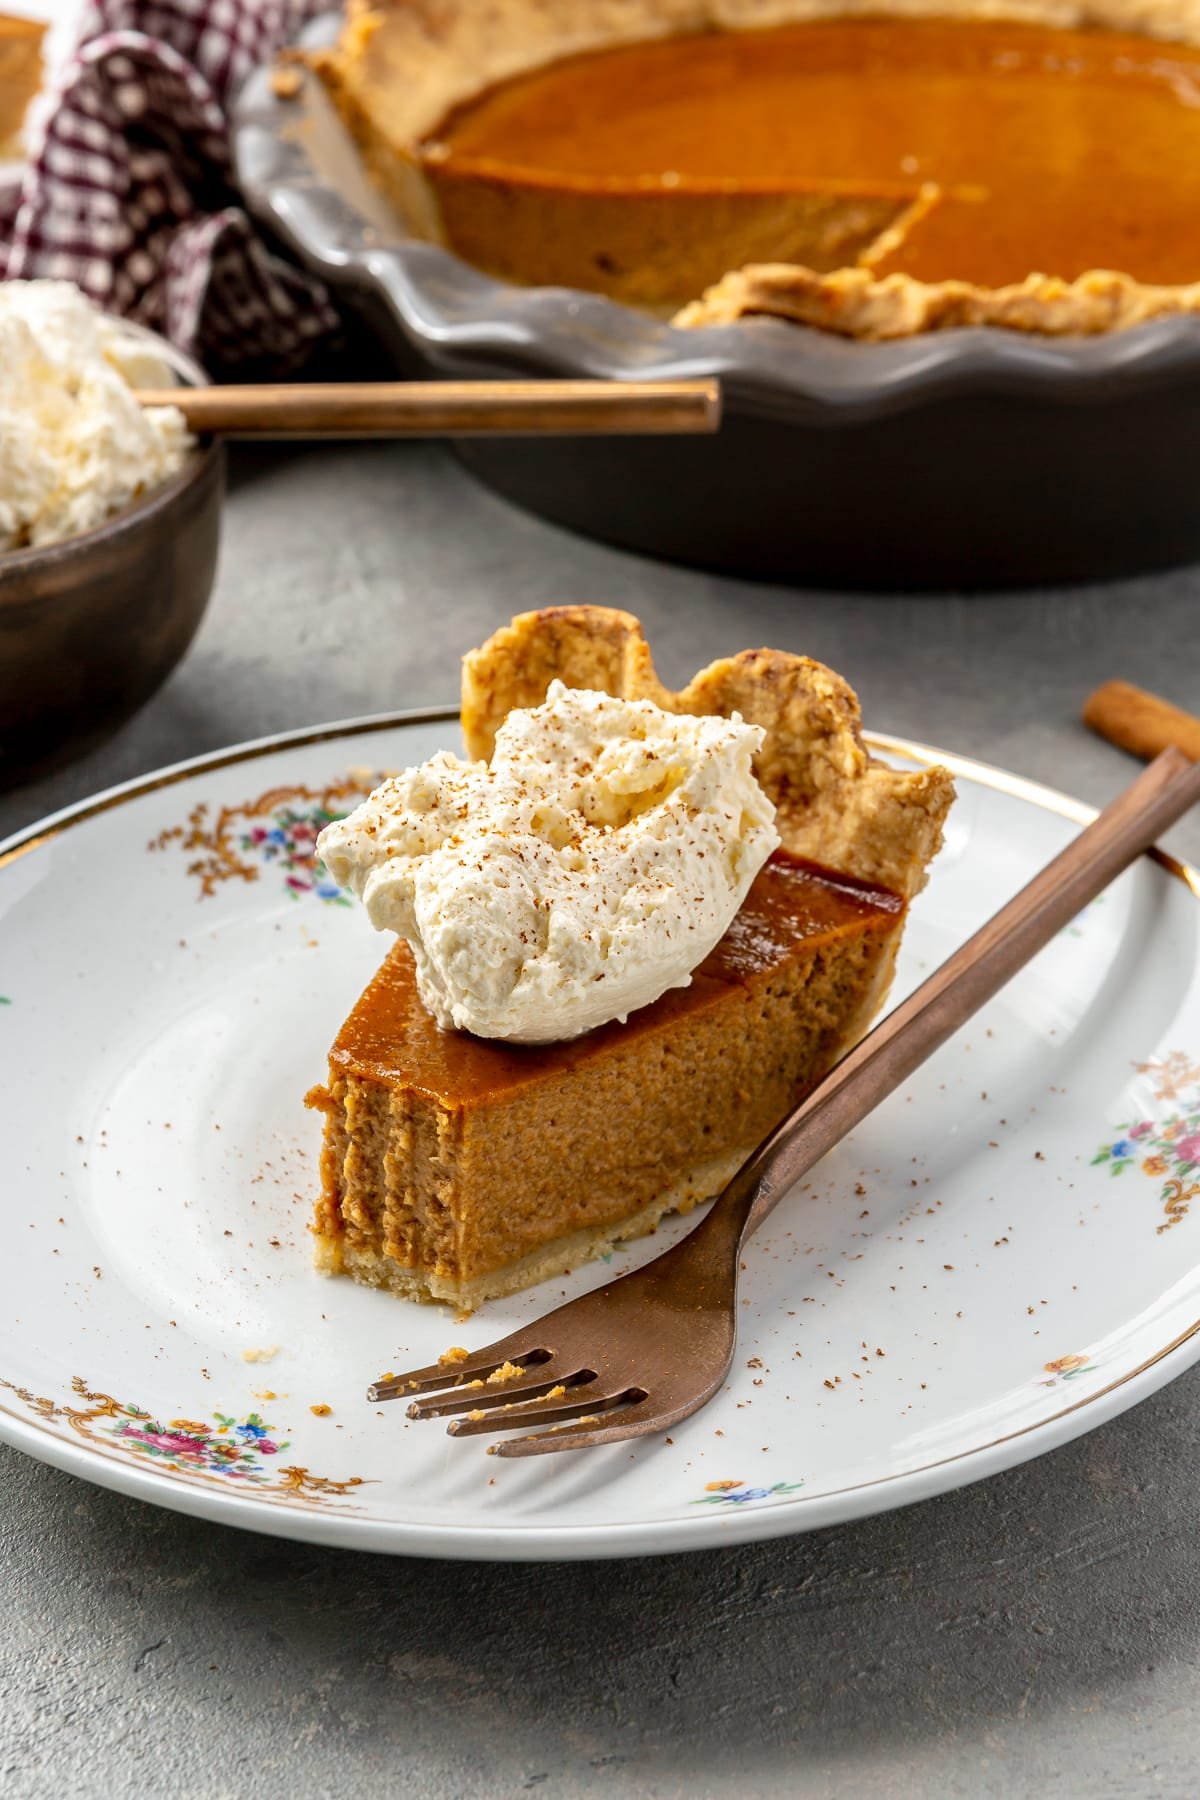 A bite has been taken out of a slice of pumpkin pie, topped with whipped cream and cinnamon. It sits on a white plate with a copper fork. The remaining pie and whipped cream sits in the background.